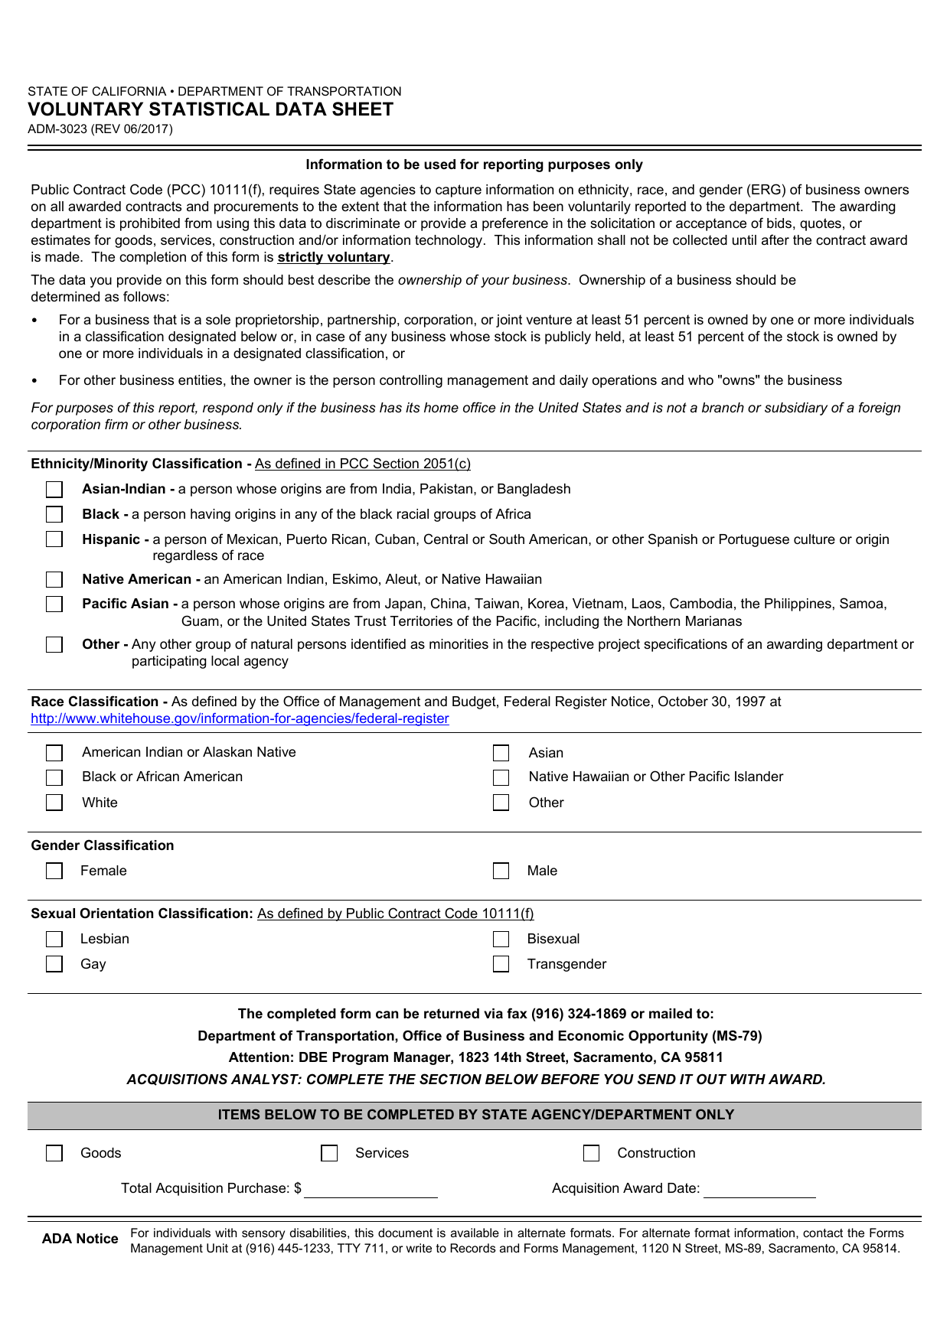 Form ADM-3023 Voluntary Statistical Data Sheet - California, Page 1